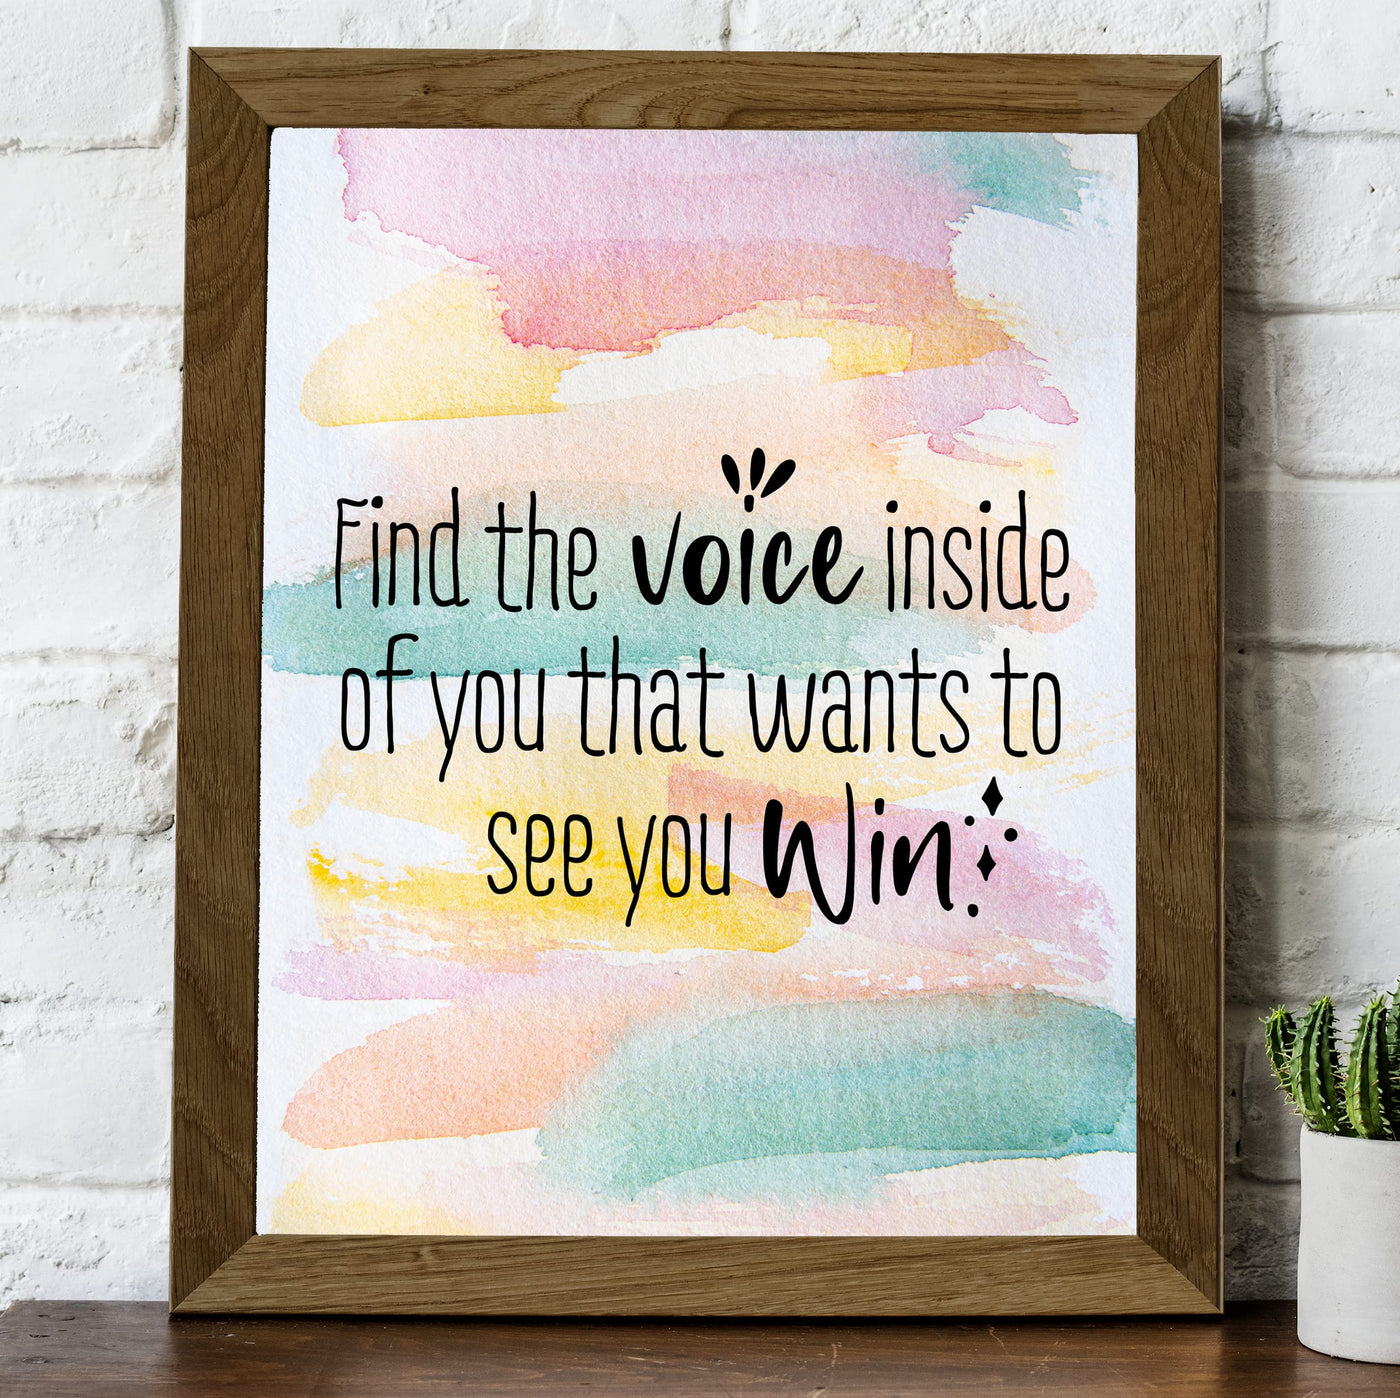 Find the Voice Inside of You That Wants You to Win-Inspirational Quotes Wall Art -8 x 10" Motivational Watercolor Picture Print-Ready to Frame. Home-Office-School Decor. Great Sign for Confidence!